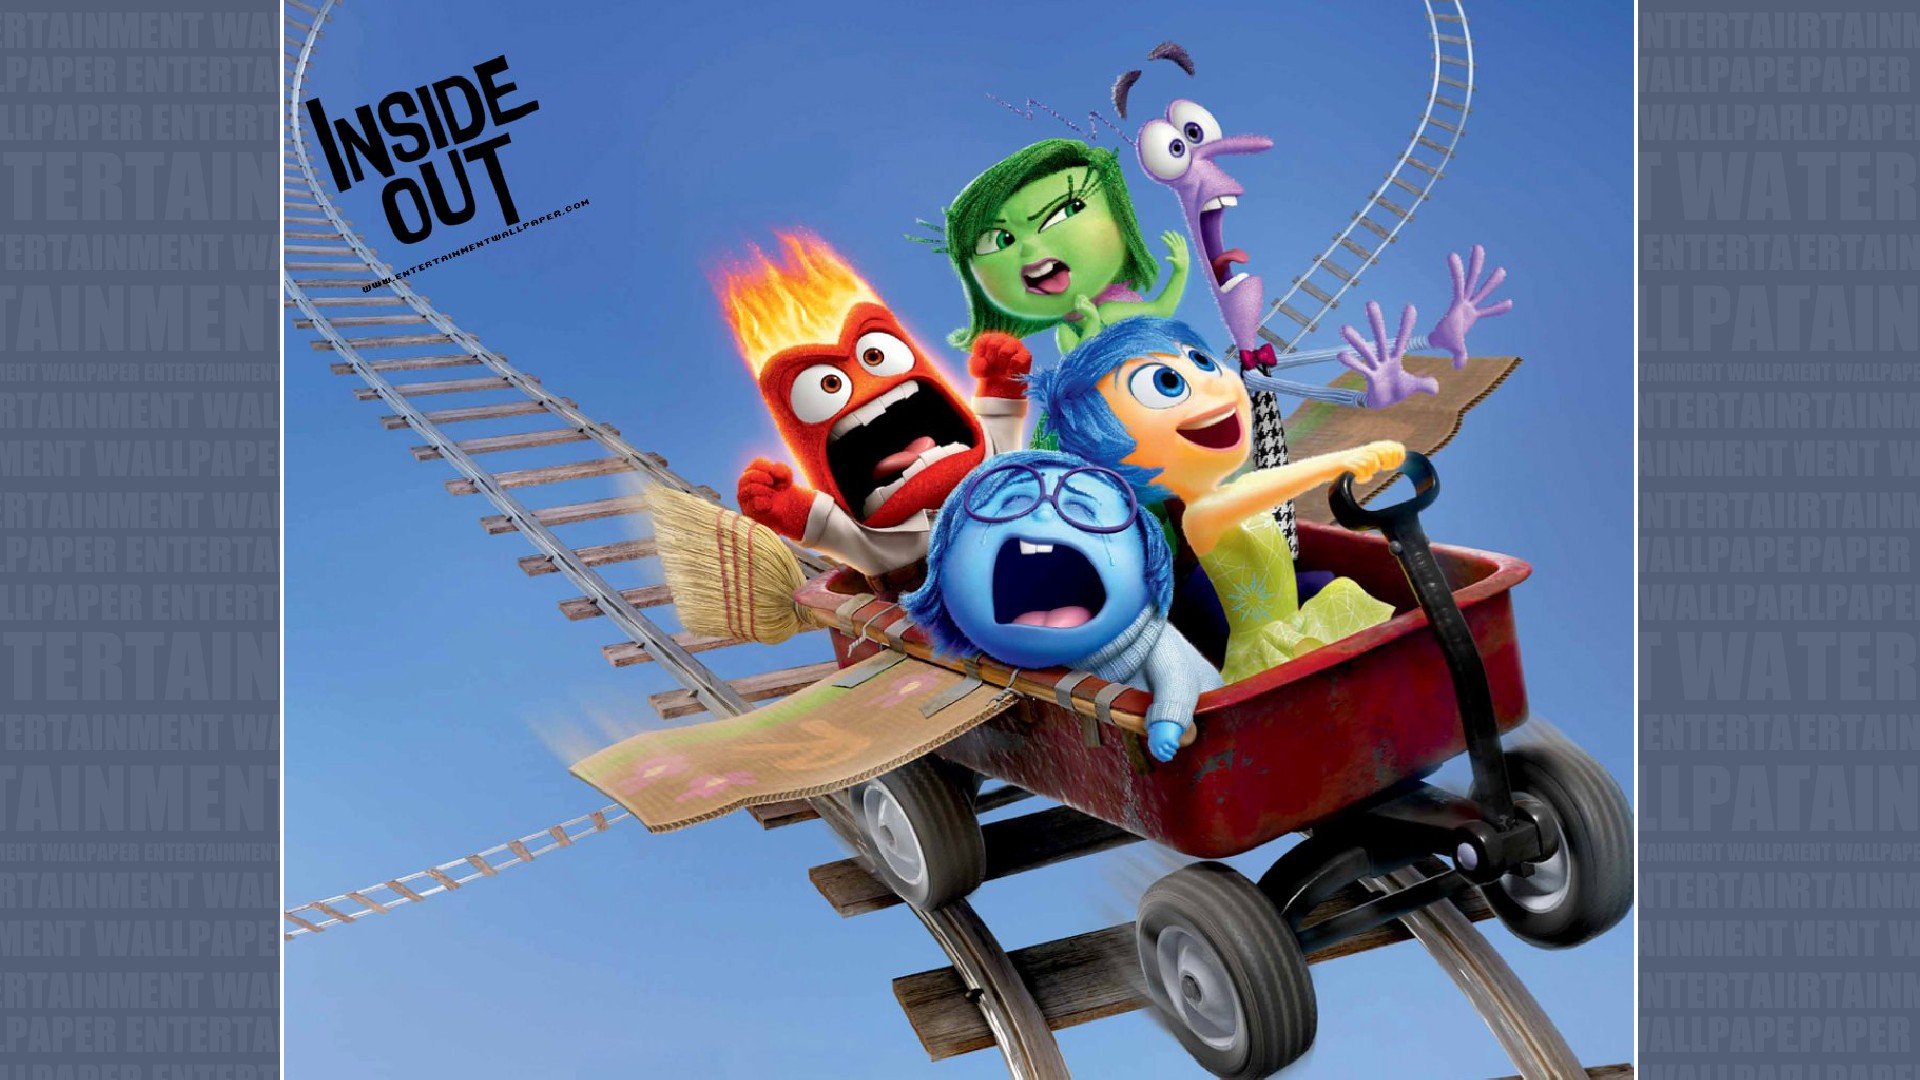 Inside Out (English) 720p 1080p